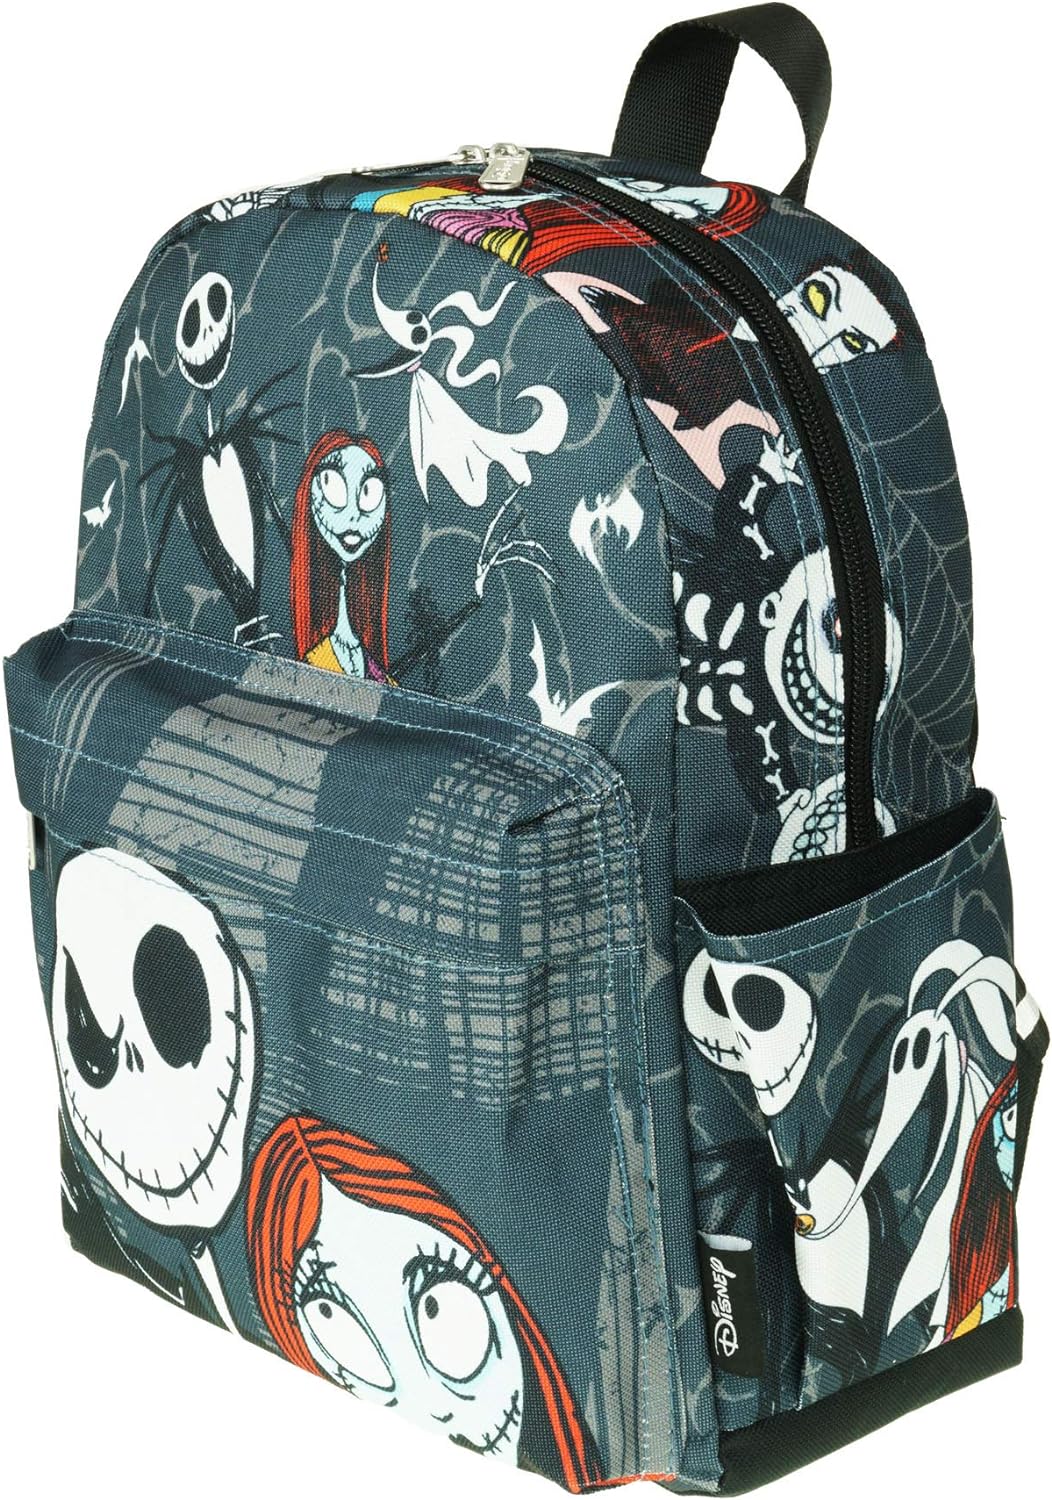 Nightmare Before Christmas 12 inch Backpack - Jack and Sally A21333